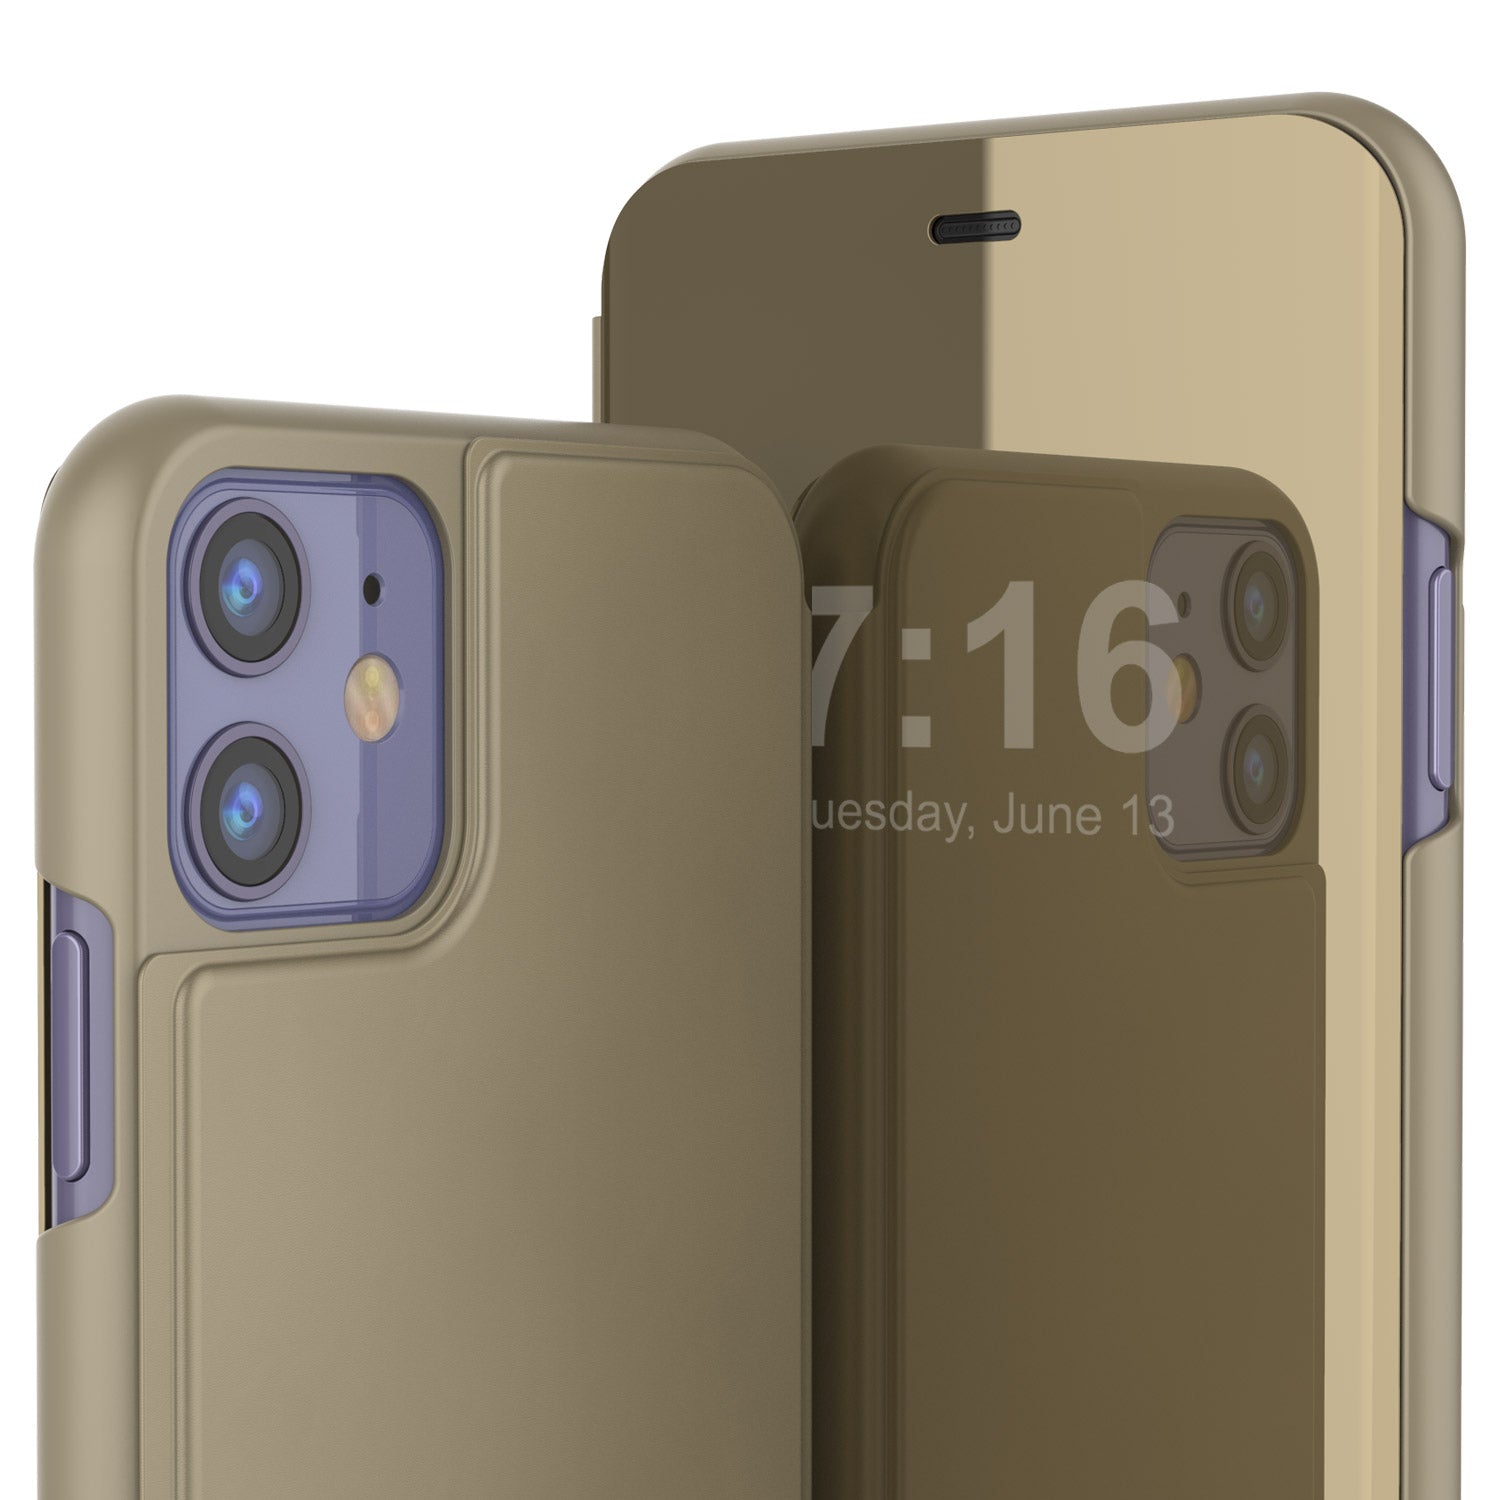 Punkcase iPhone 11 / XI Reflector Case Protective Flip Cover [Gold]